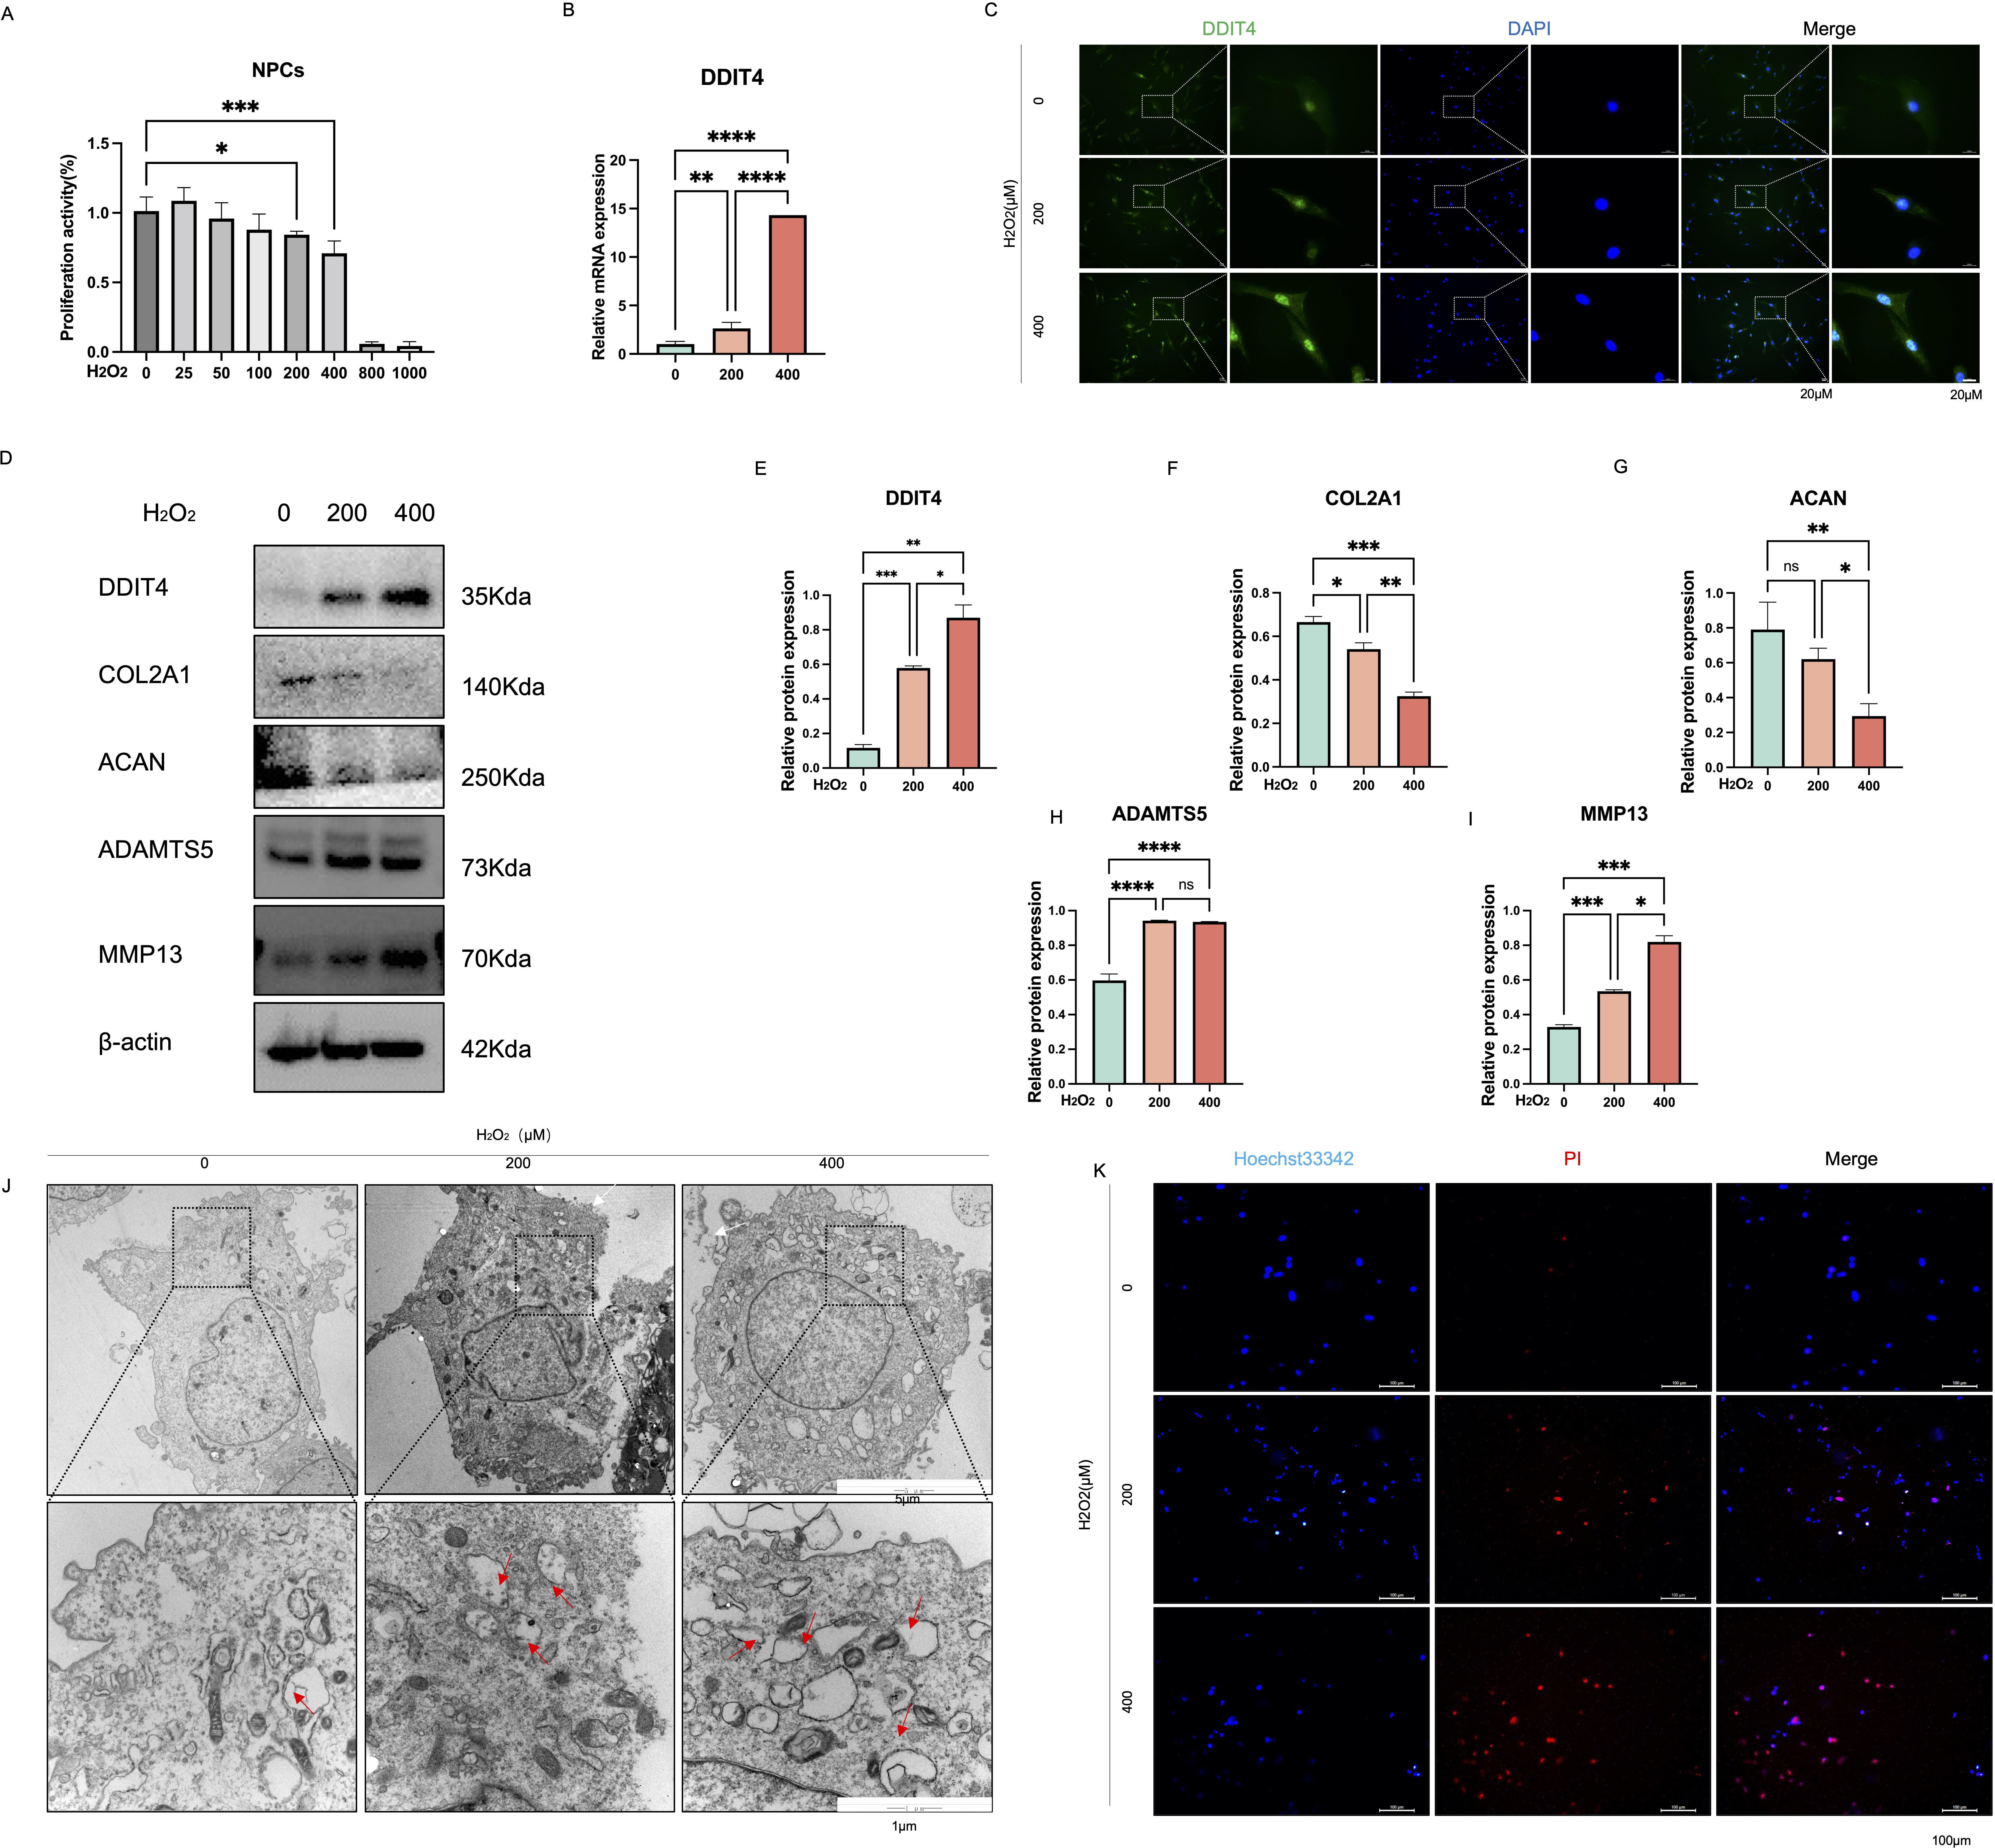 Fig. 2 
            Oxidative stress triggers DDIT4 upregulation and pyroptosis in nucleus pulposus cells (NPCs). a) Quantitative analysis of the viability of rat NPCs cultured with different concentrations (0 to 1,000 μM) of hydrogen peroxide for 24 hours. b) Select rat NPCs were incubated with different concentrations of hydrogen peroxide (0, 200, and 400 μM) for 24 hours, qRT-PCR analysis of DDIT4 mRNA expression levels in rat NPCs exposed to 0, 200, and 400 μM hydrogen peroxide. Error bars are the mean and standard deviation (n = 3); **p < 0.01, ***p < 0.001.and ****p < 0.0001, independent-samples t-test. c) Immunofluorescence analysis of DDIT4 in hydrogen peroxide-treated NPCs and control NPCs; scale bars, 20 μm. d) to i) Representative western blotting images and quantitative analysis of DDIT4, COL2A1, ACAN, ADAMTS5, and matrix metalloproteinase 13 (MMP13) in hydrogen peroxide-treated NPCs and control NPCs. j) Transmission electron microscope images of hydrogen peroxide-treated NPCs, such as cytoplasmic oedema, swelling of cell membrane, karyopyknosis, and organelle cavitation, white arrows show swelling of cell membrane; red arrows show organelle cavitation, Scale bars in overall view: 5 μm; scale bars in local view: 1 μm. k) Representative fluorescence images of Hoechst 33342/PI-stained hydrogen peroxide-treated NPCs; scale bars, 20 μm. Data are expressed as the mean and standard deviation of at least three independent experiments. Two-way analysis of variance was used for statistical analysis (*p < 0.05; **p < 0.01; ***p < 0.001; ****p < 0.0001).
          